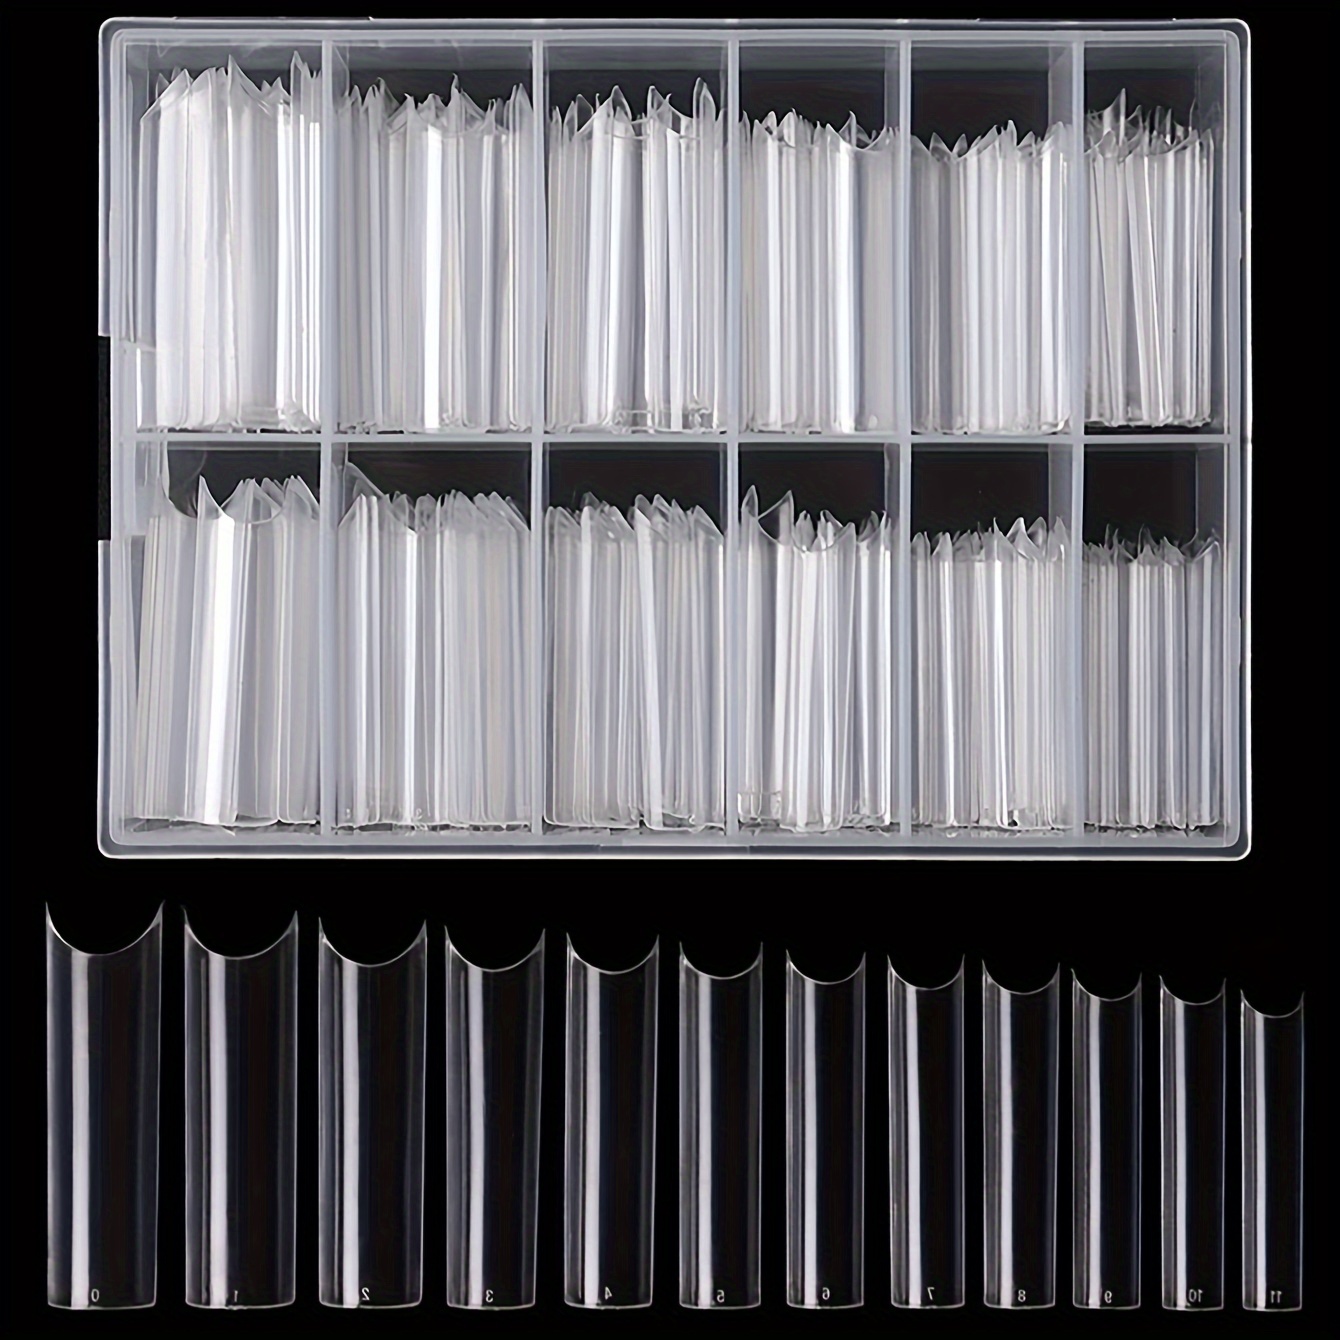 

240pcs Transparent Fake Nail Tips, Ultra-thin And No Need For Carving Or Grinding For Beautiful Press On Nails